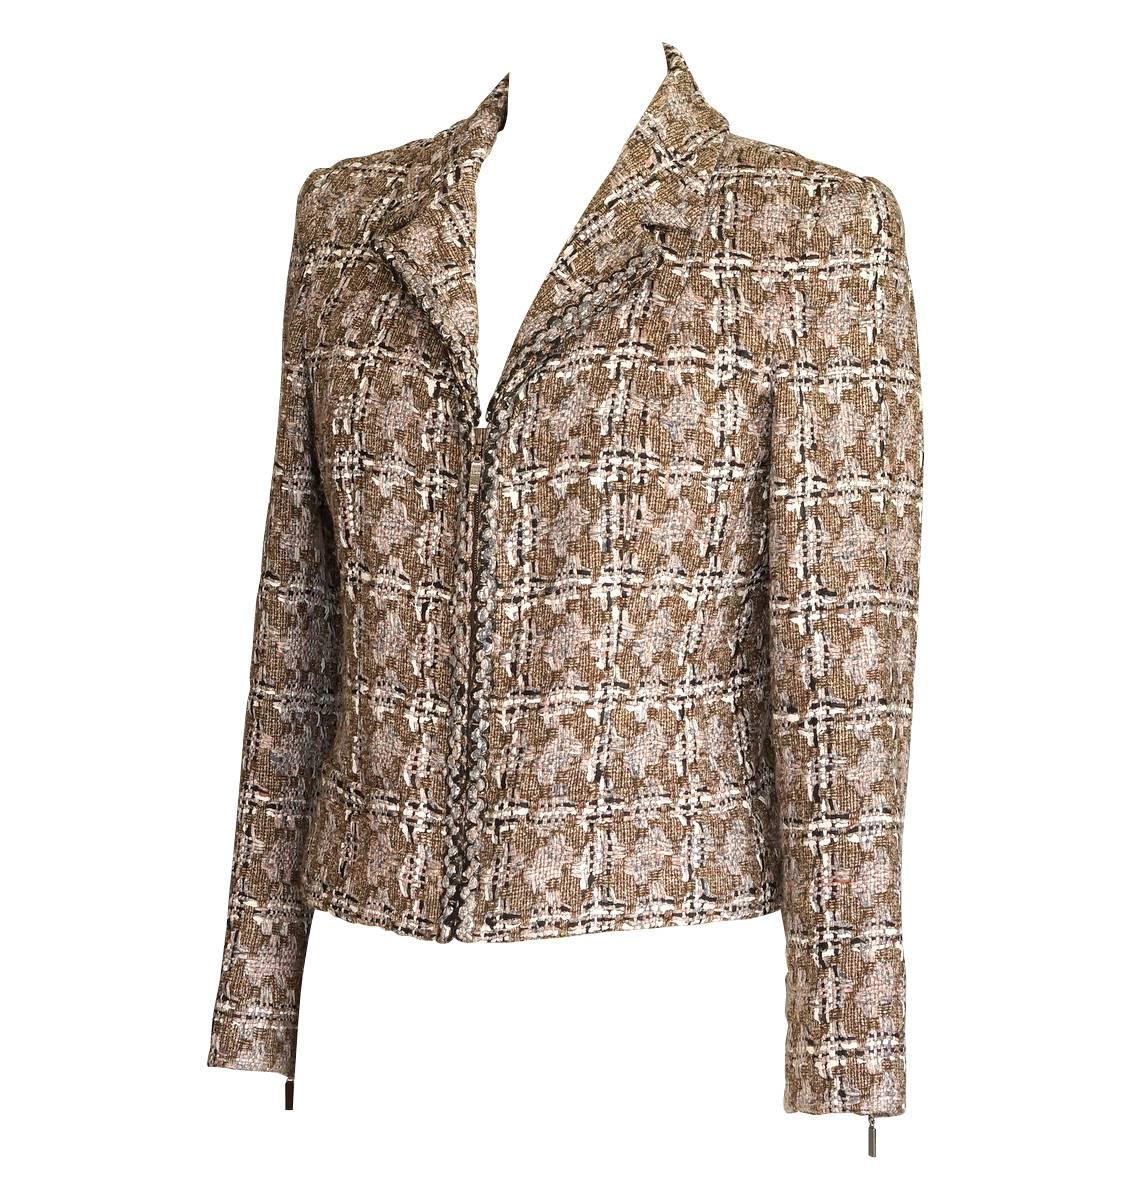 Guaranteed authentic Chanel 03P beautiful tweed suit in shades of taupe, gray, black, cream and soft touches of pink.
Gray and black braided tweed along zippers in front and cuffs.
2 front slot pockets.
Skirt has braided tweed around waist and down